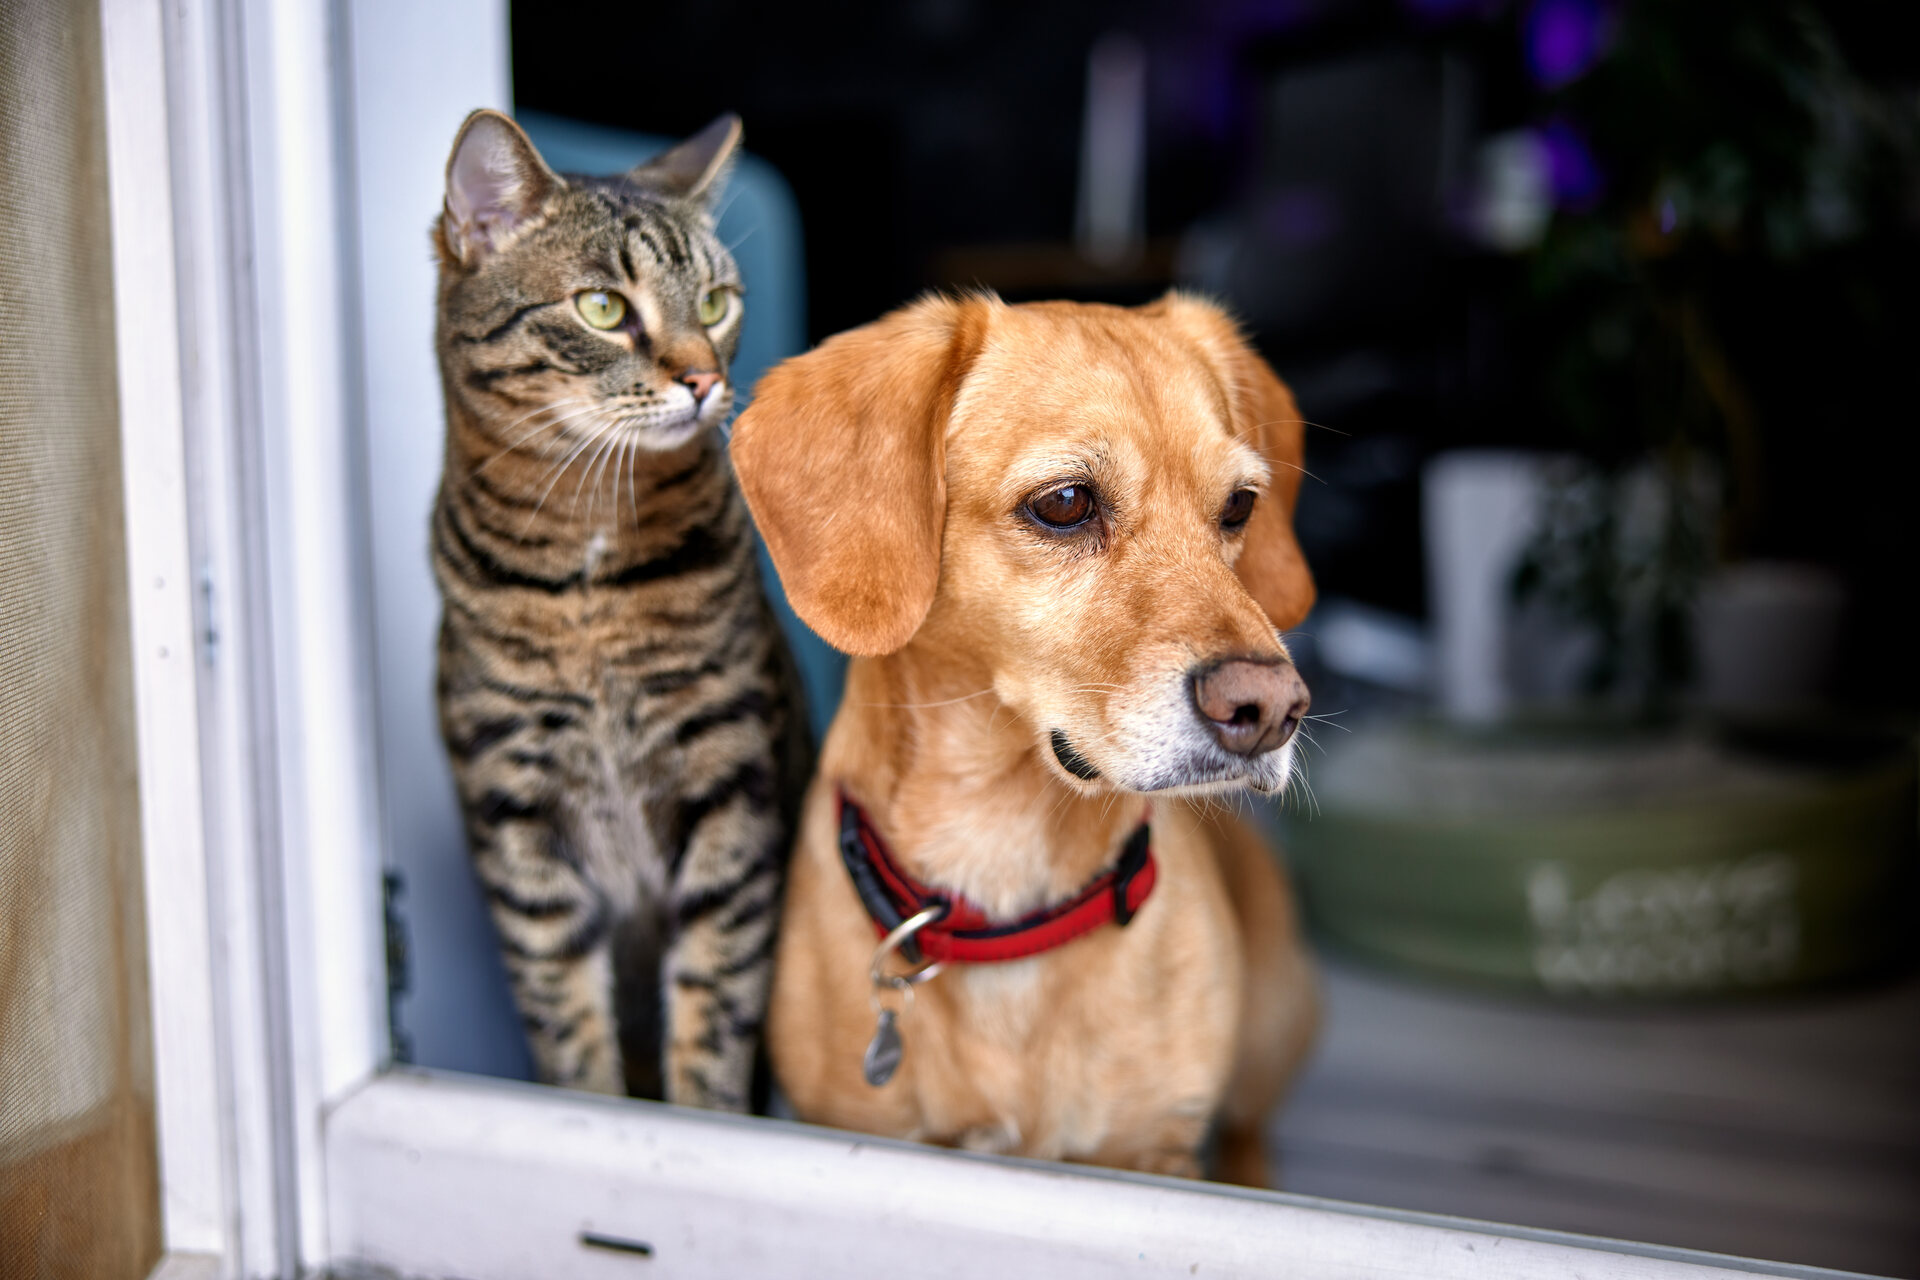 A dog and cat sitting by a window